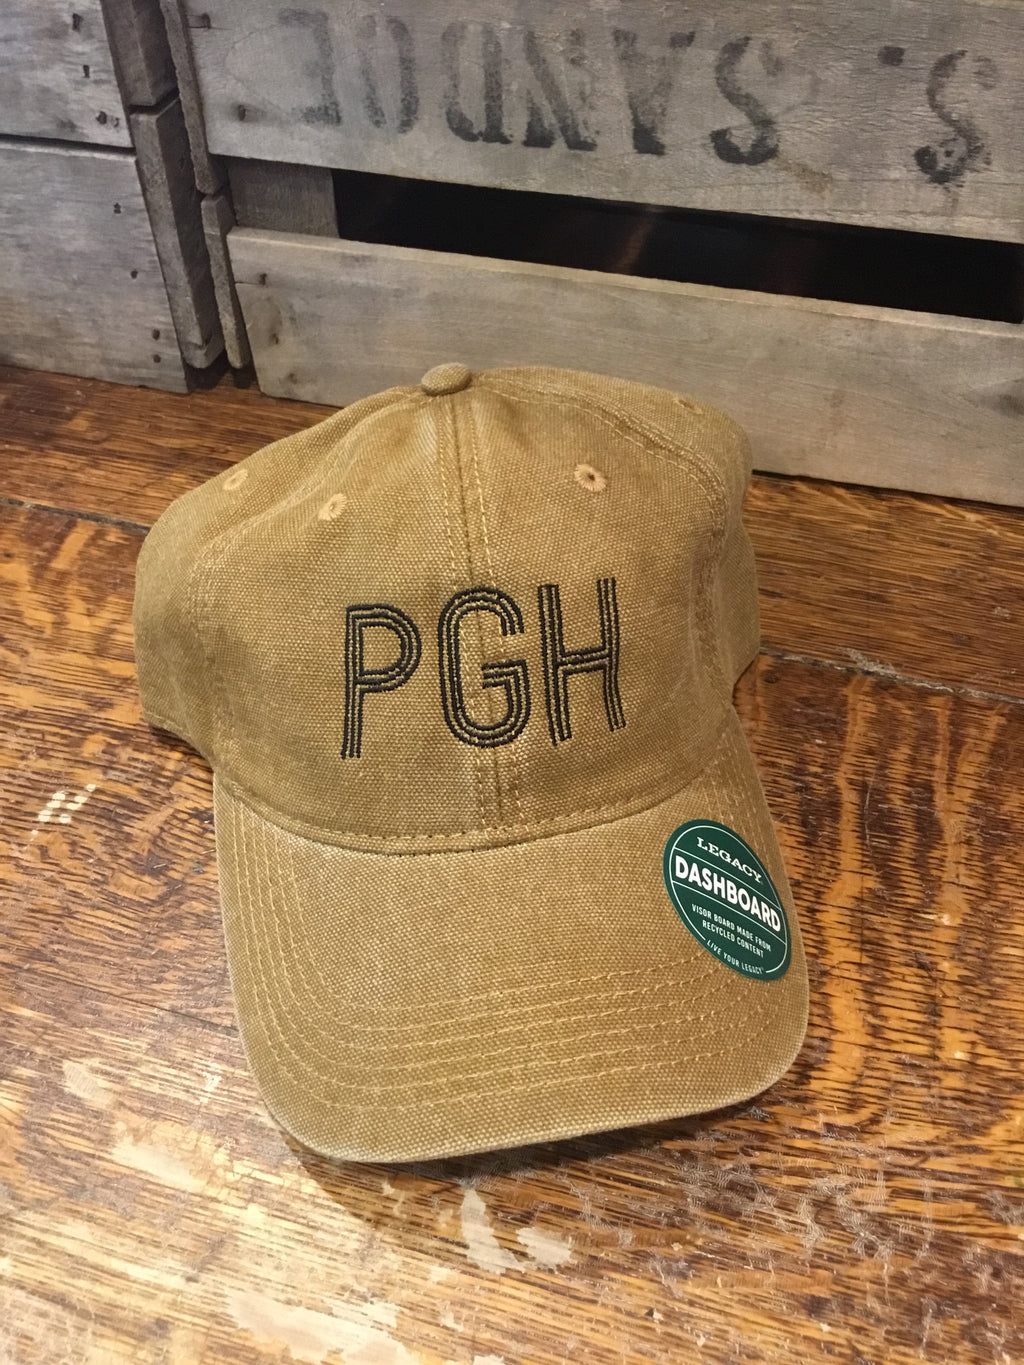 Embroidered PGH baseball hat